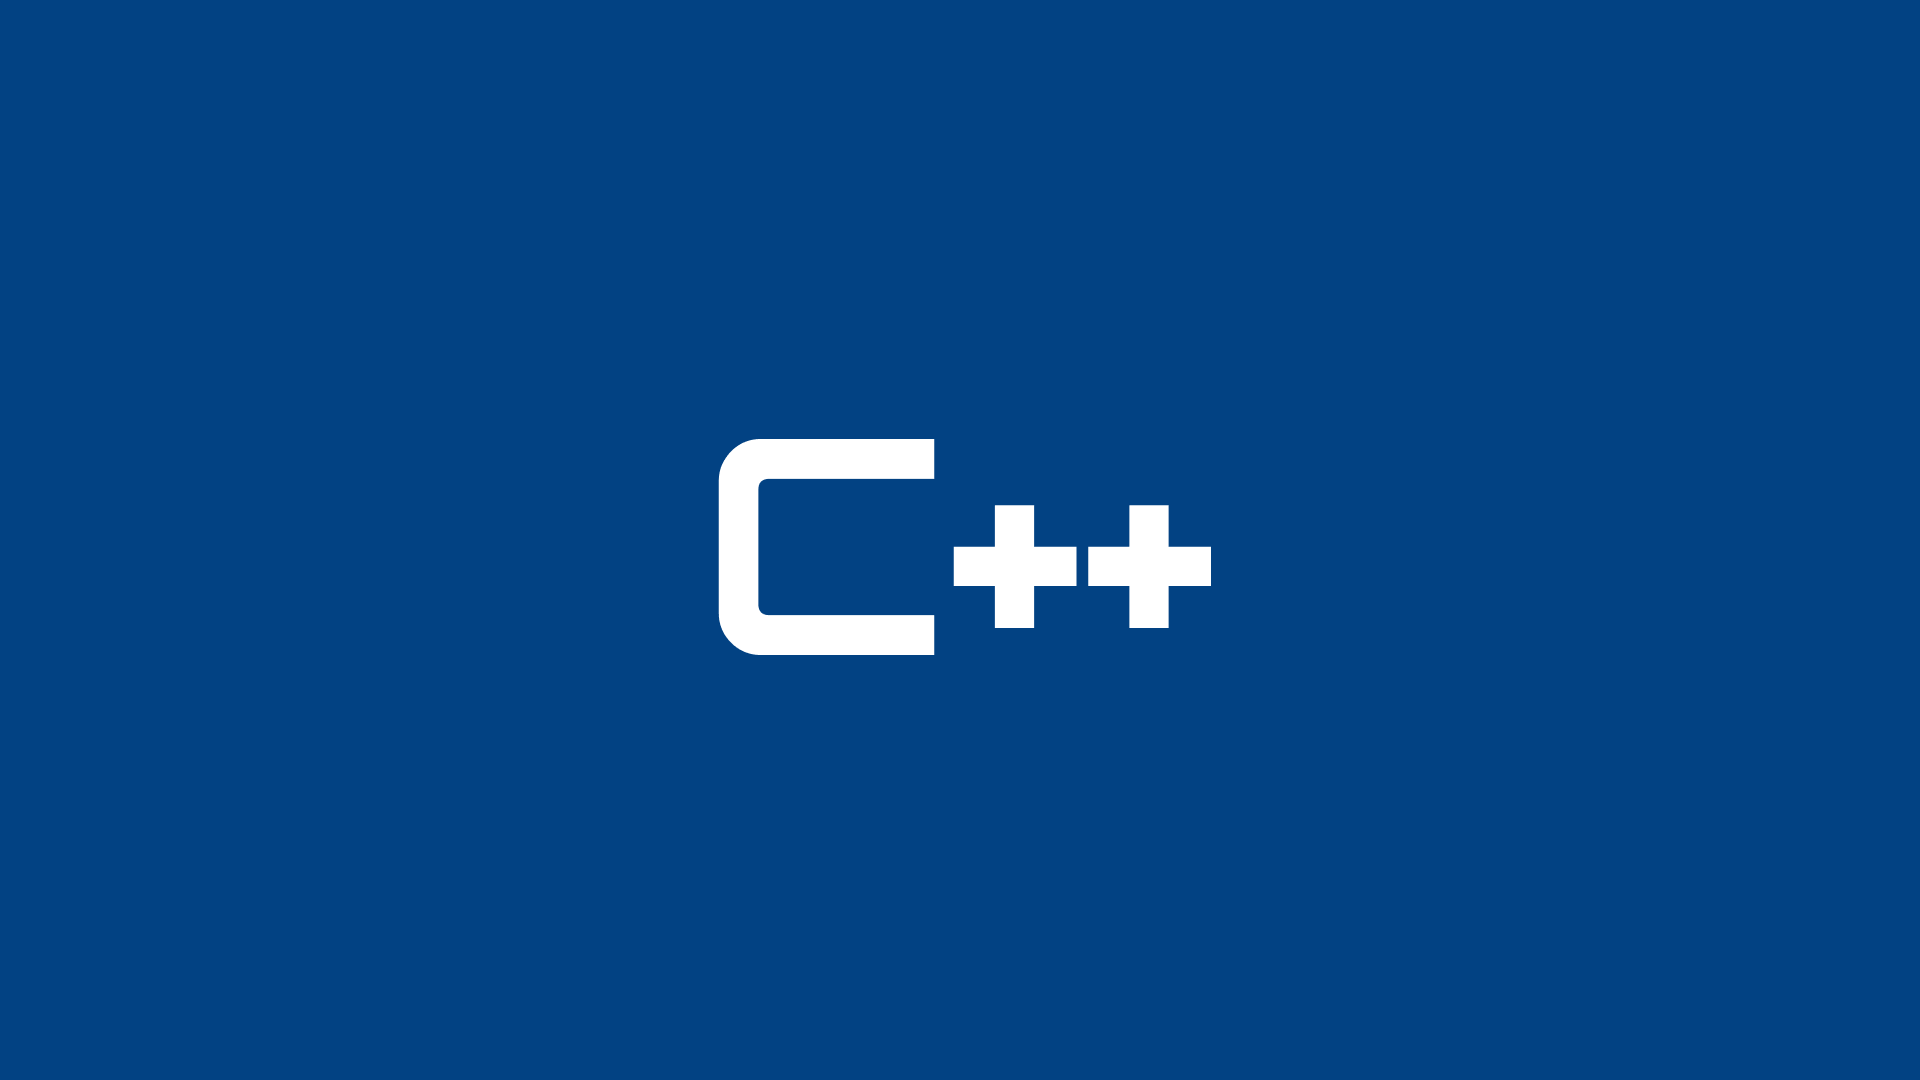 C++ cout: Usage and Examples